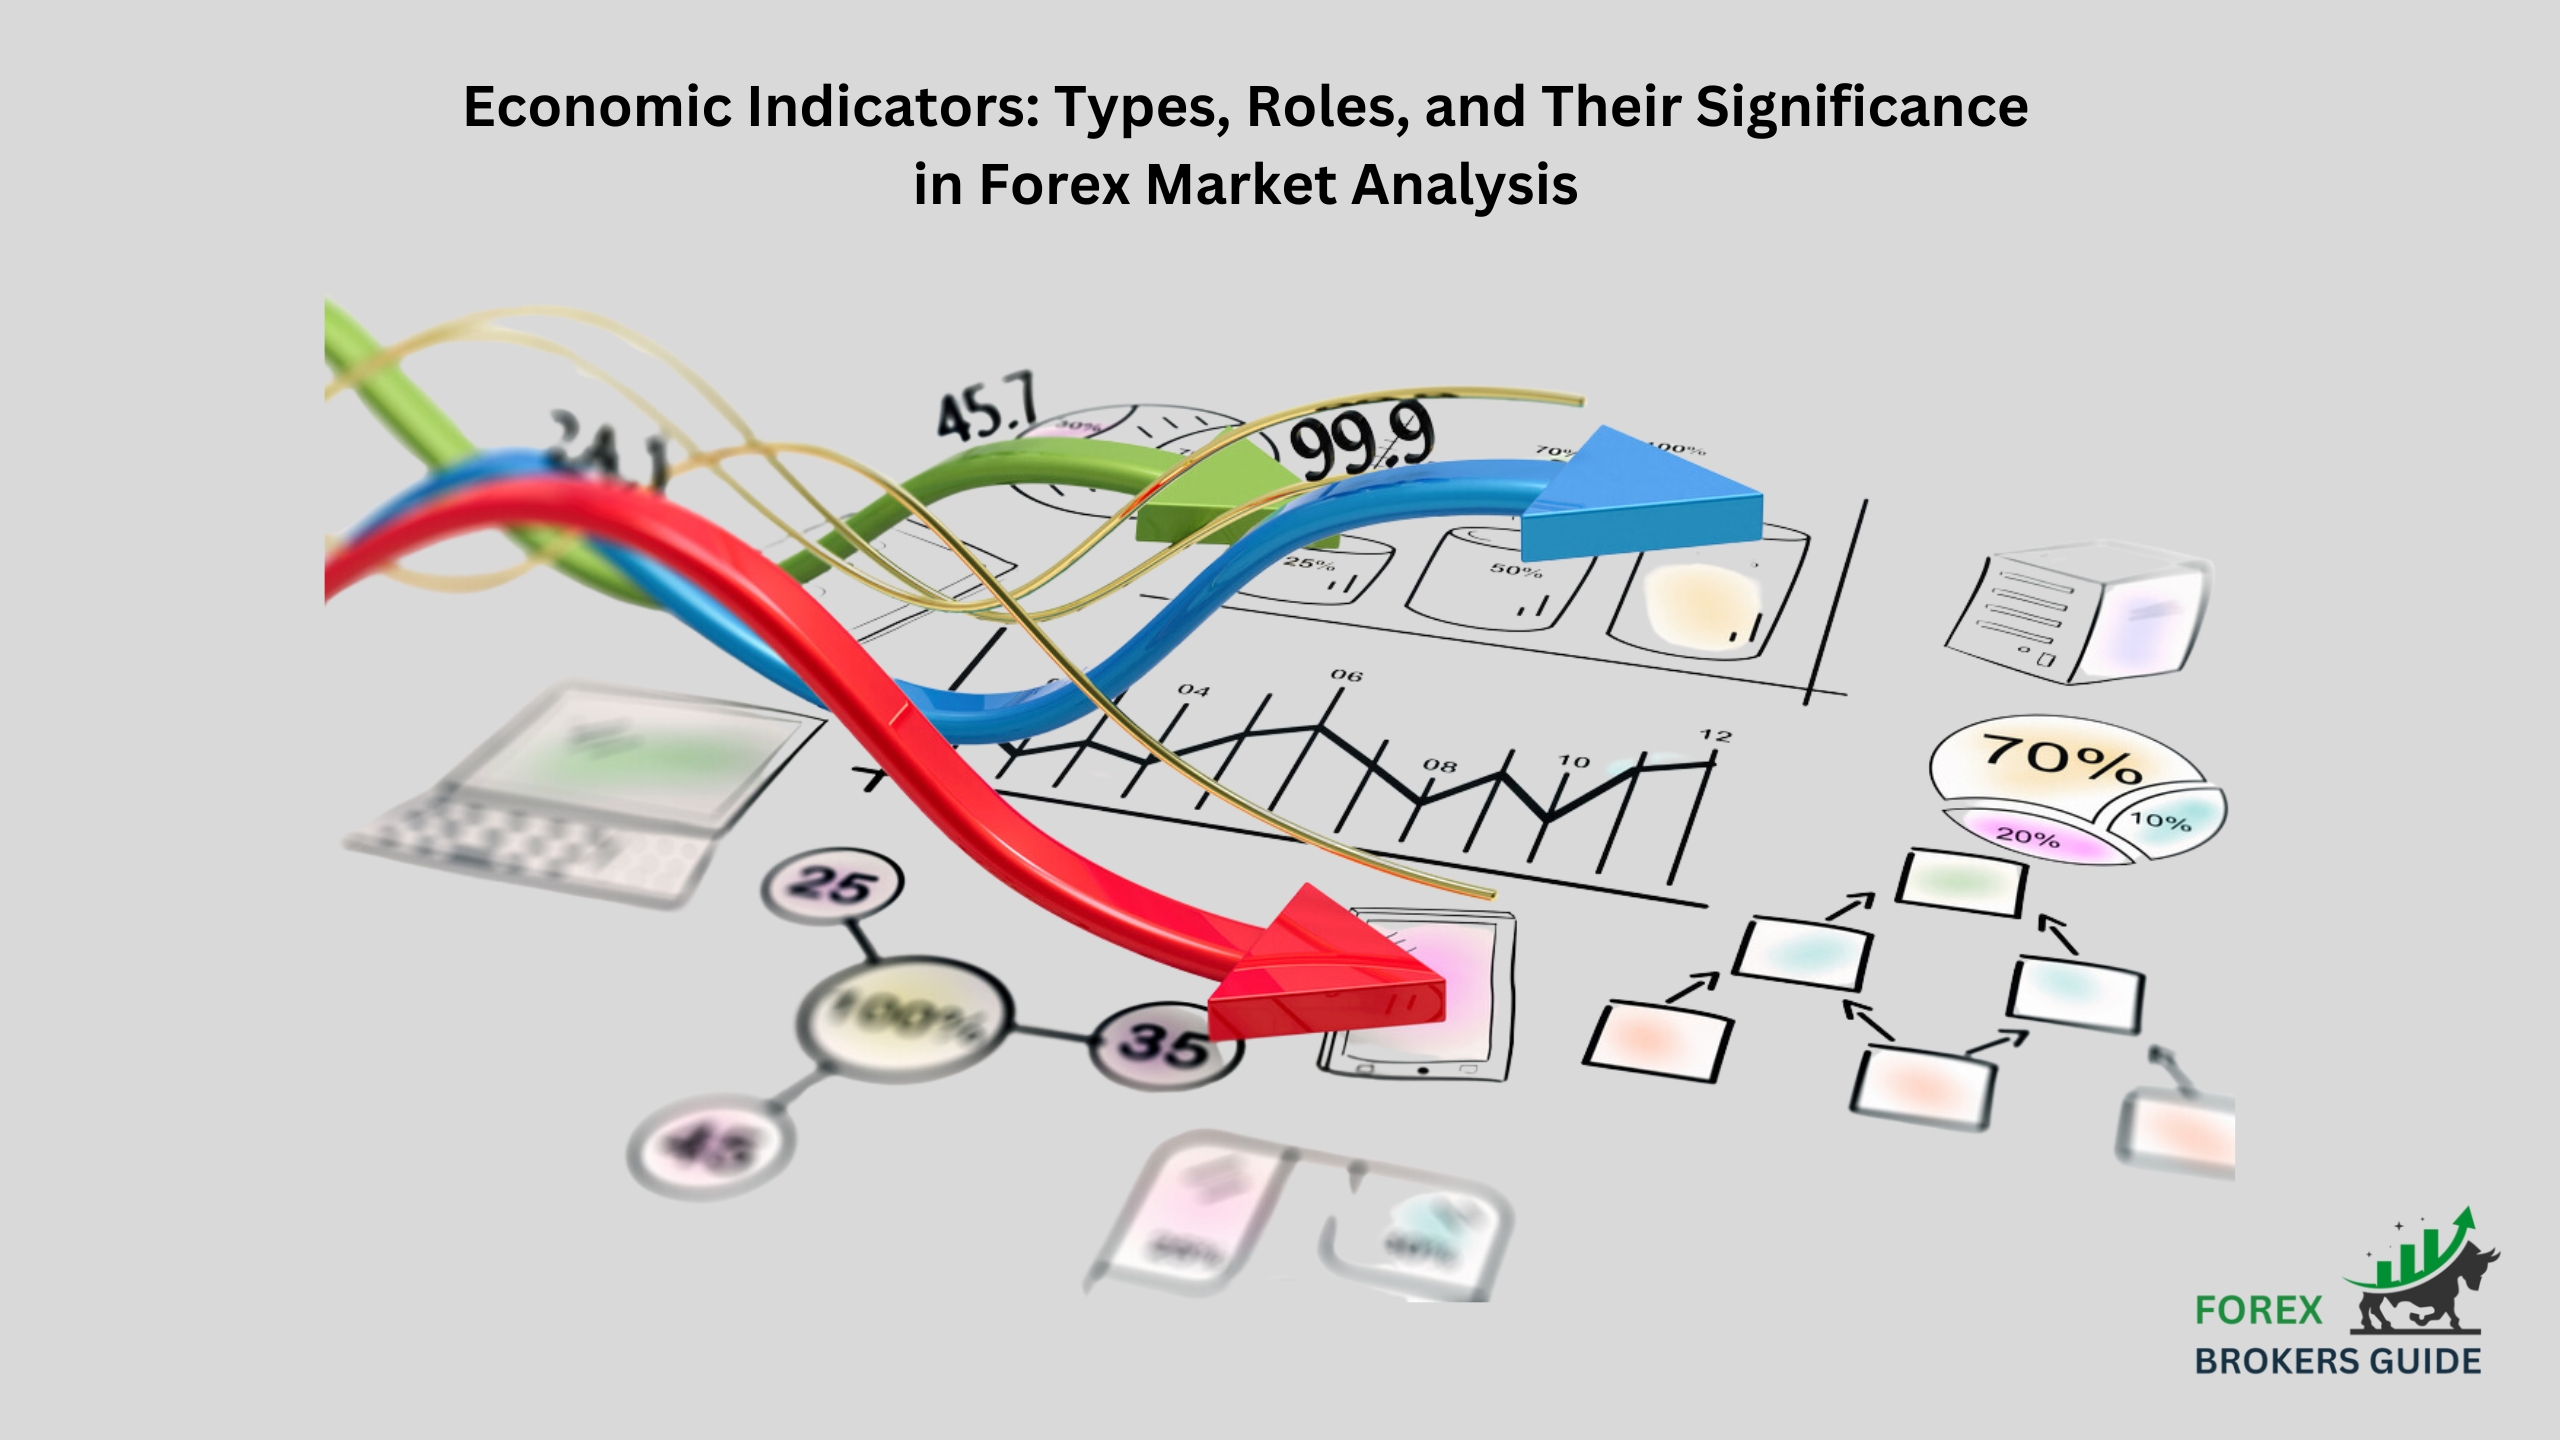 Economic Indicators Types, Roles, and Their Significance in Forex Market Analysis